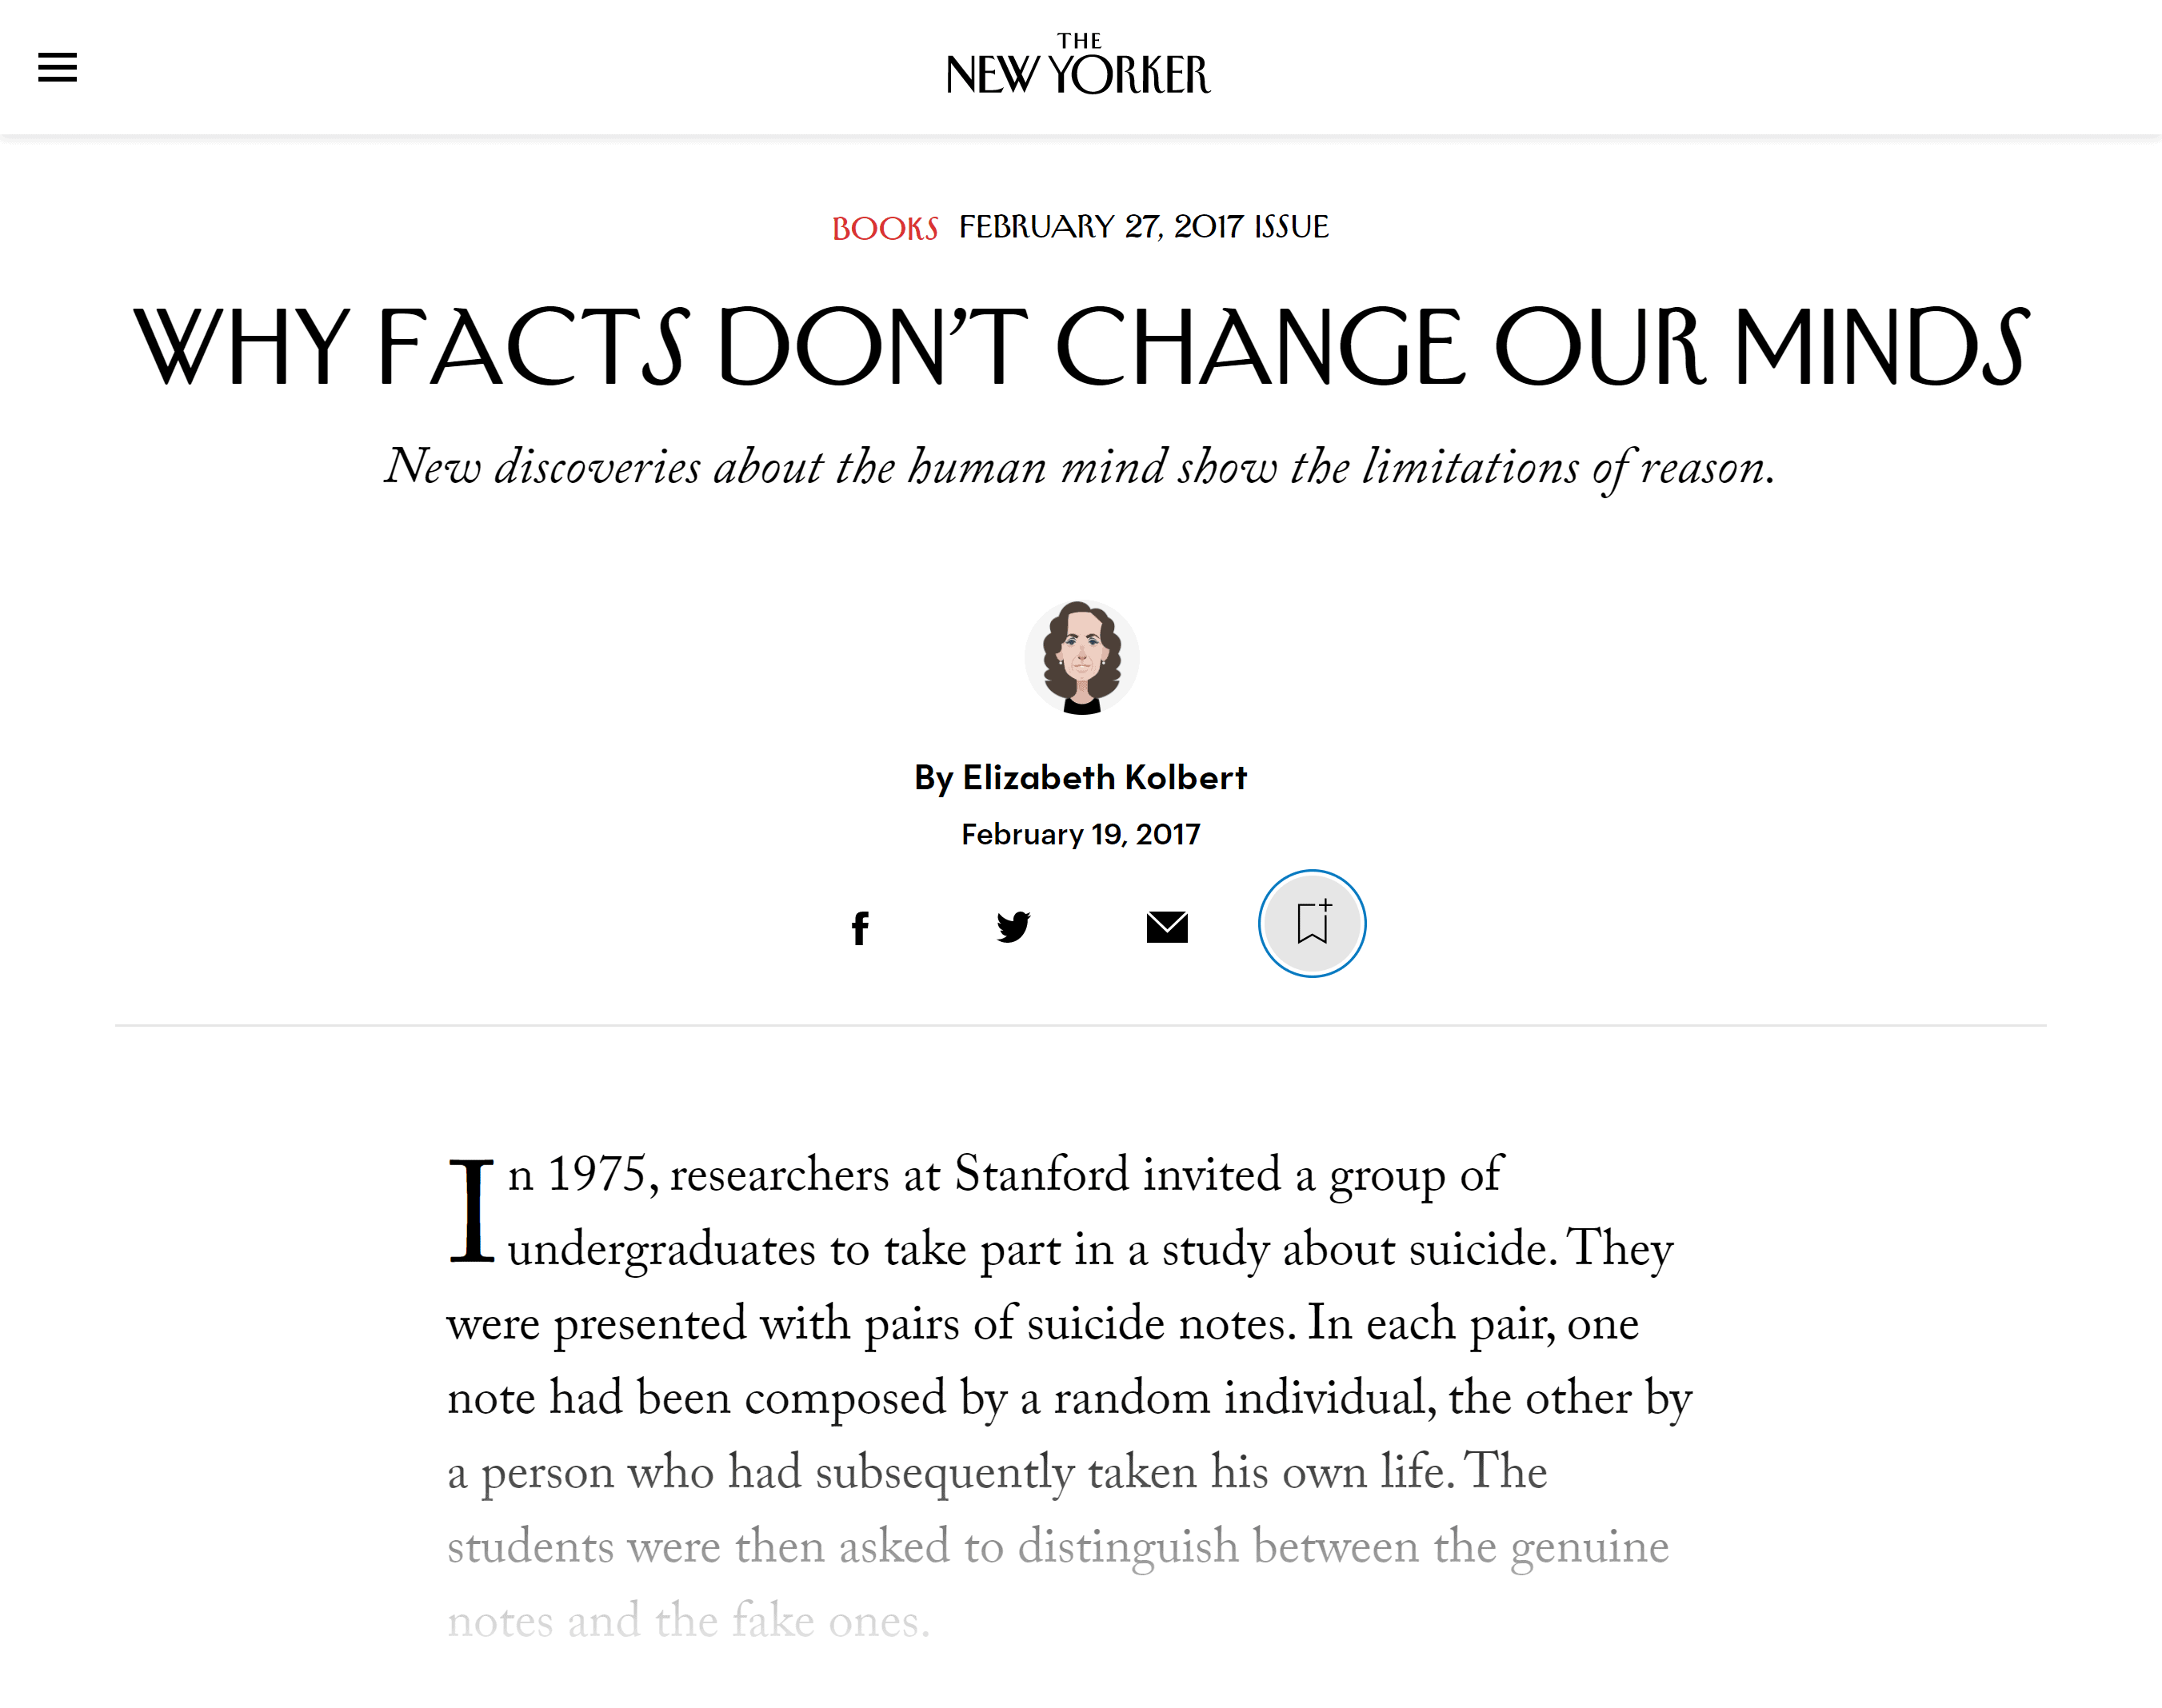 The New Yorker – Why facts don't change our minds